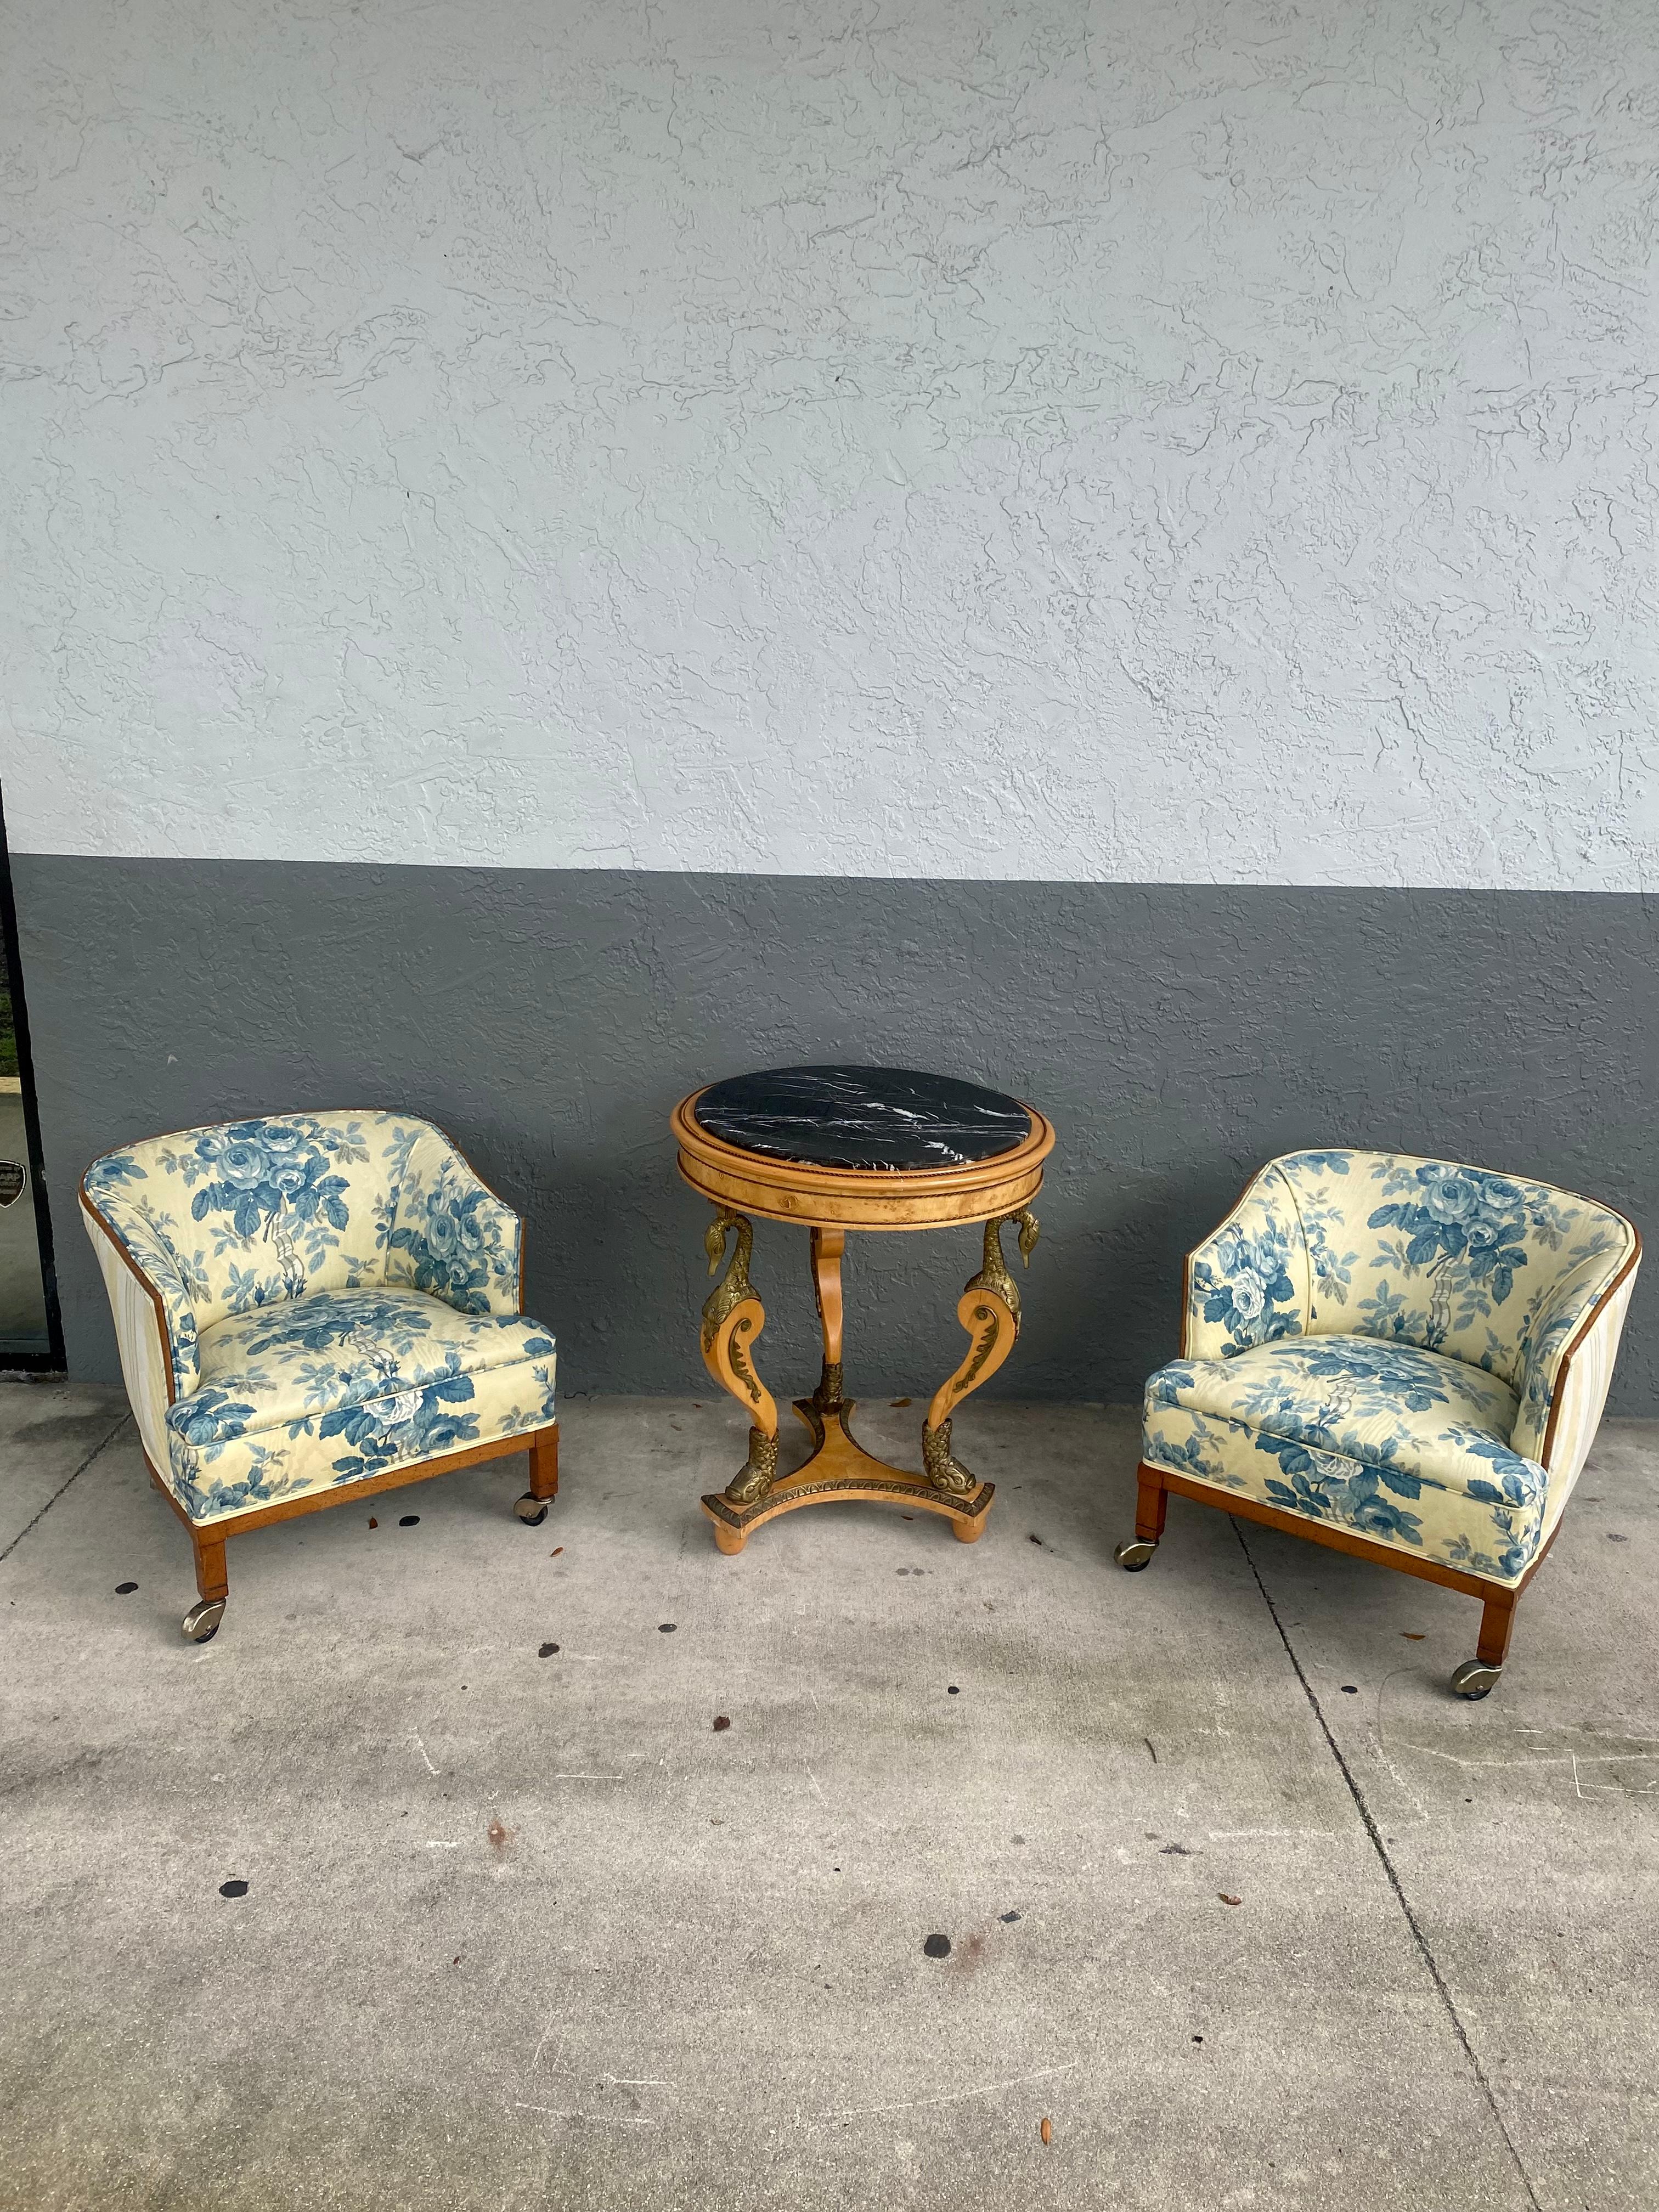 1960s French Toile Barrel Back Wood Castors Chairs, Set of 2 For Sale 3